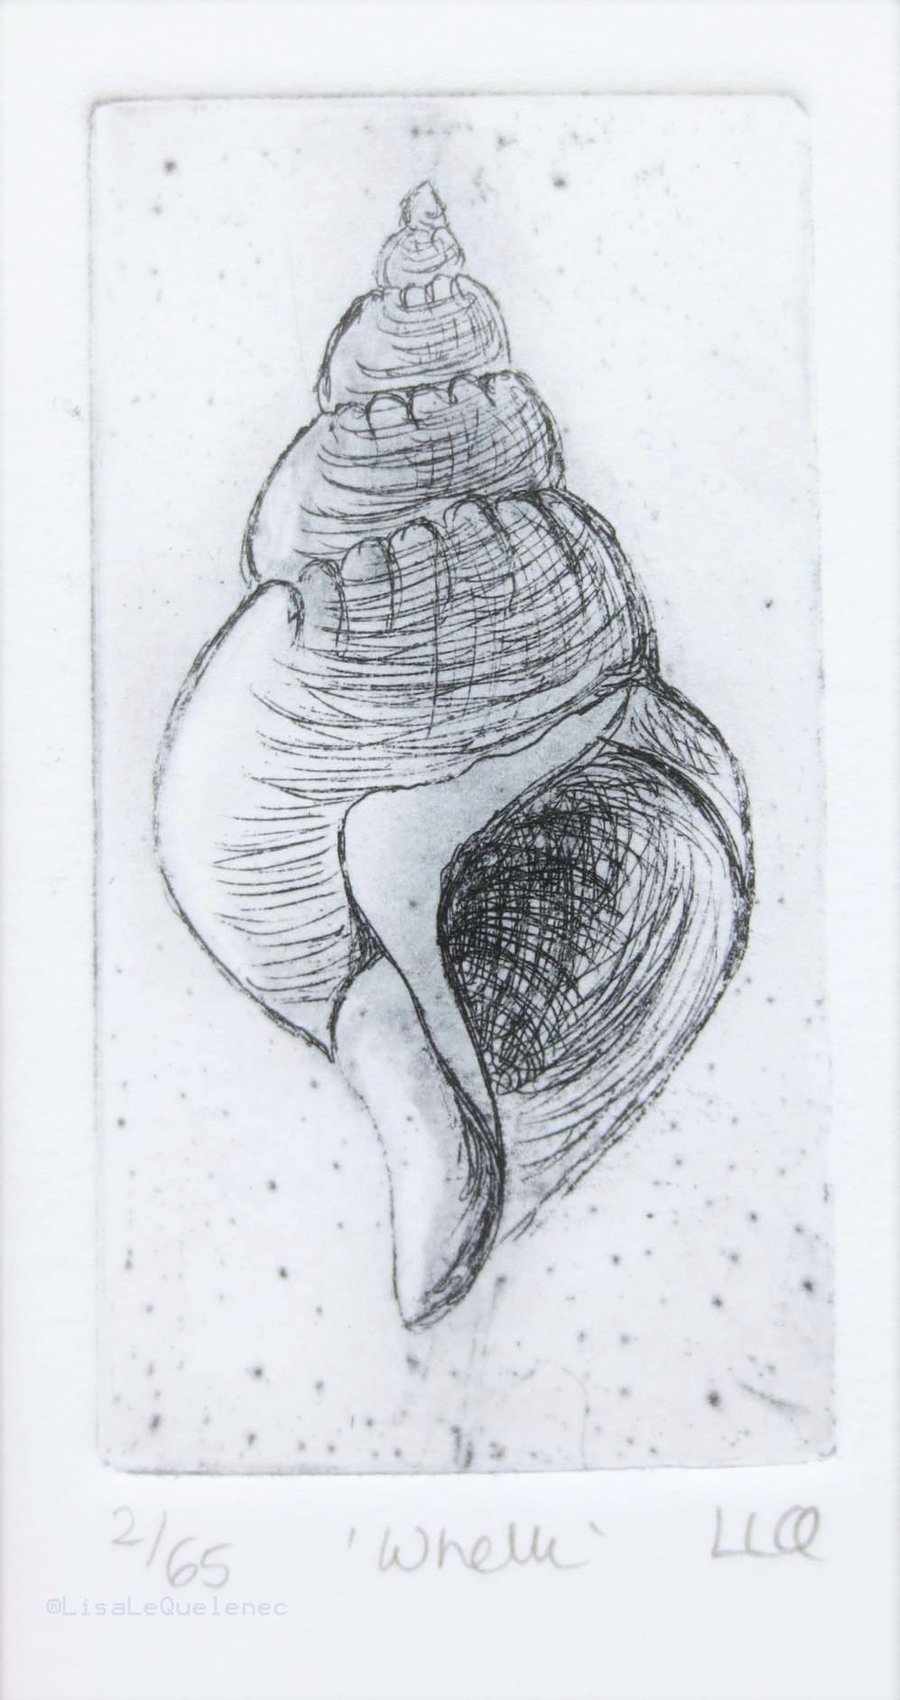 Original etching of a whelk seashell no. 2 of 65 in a limited edition